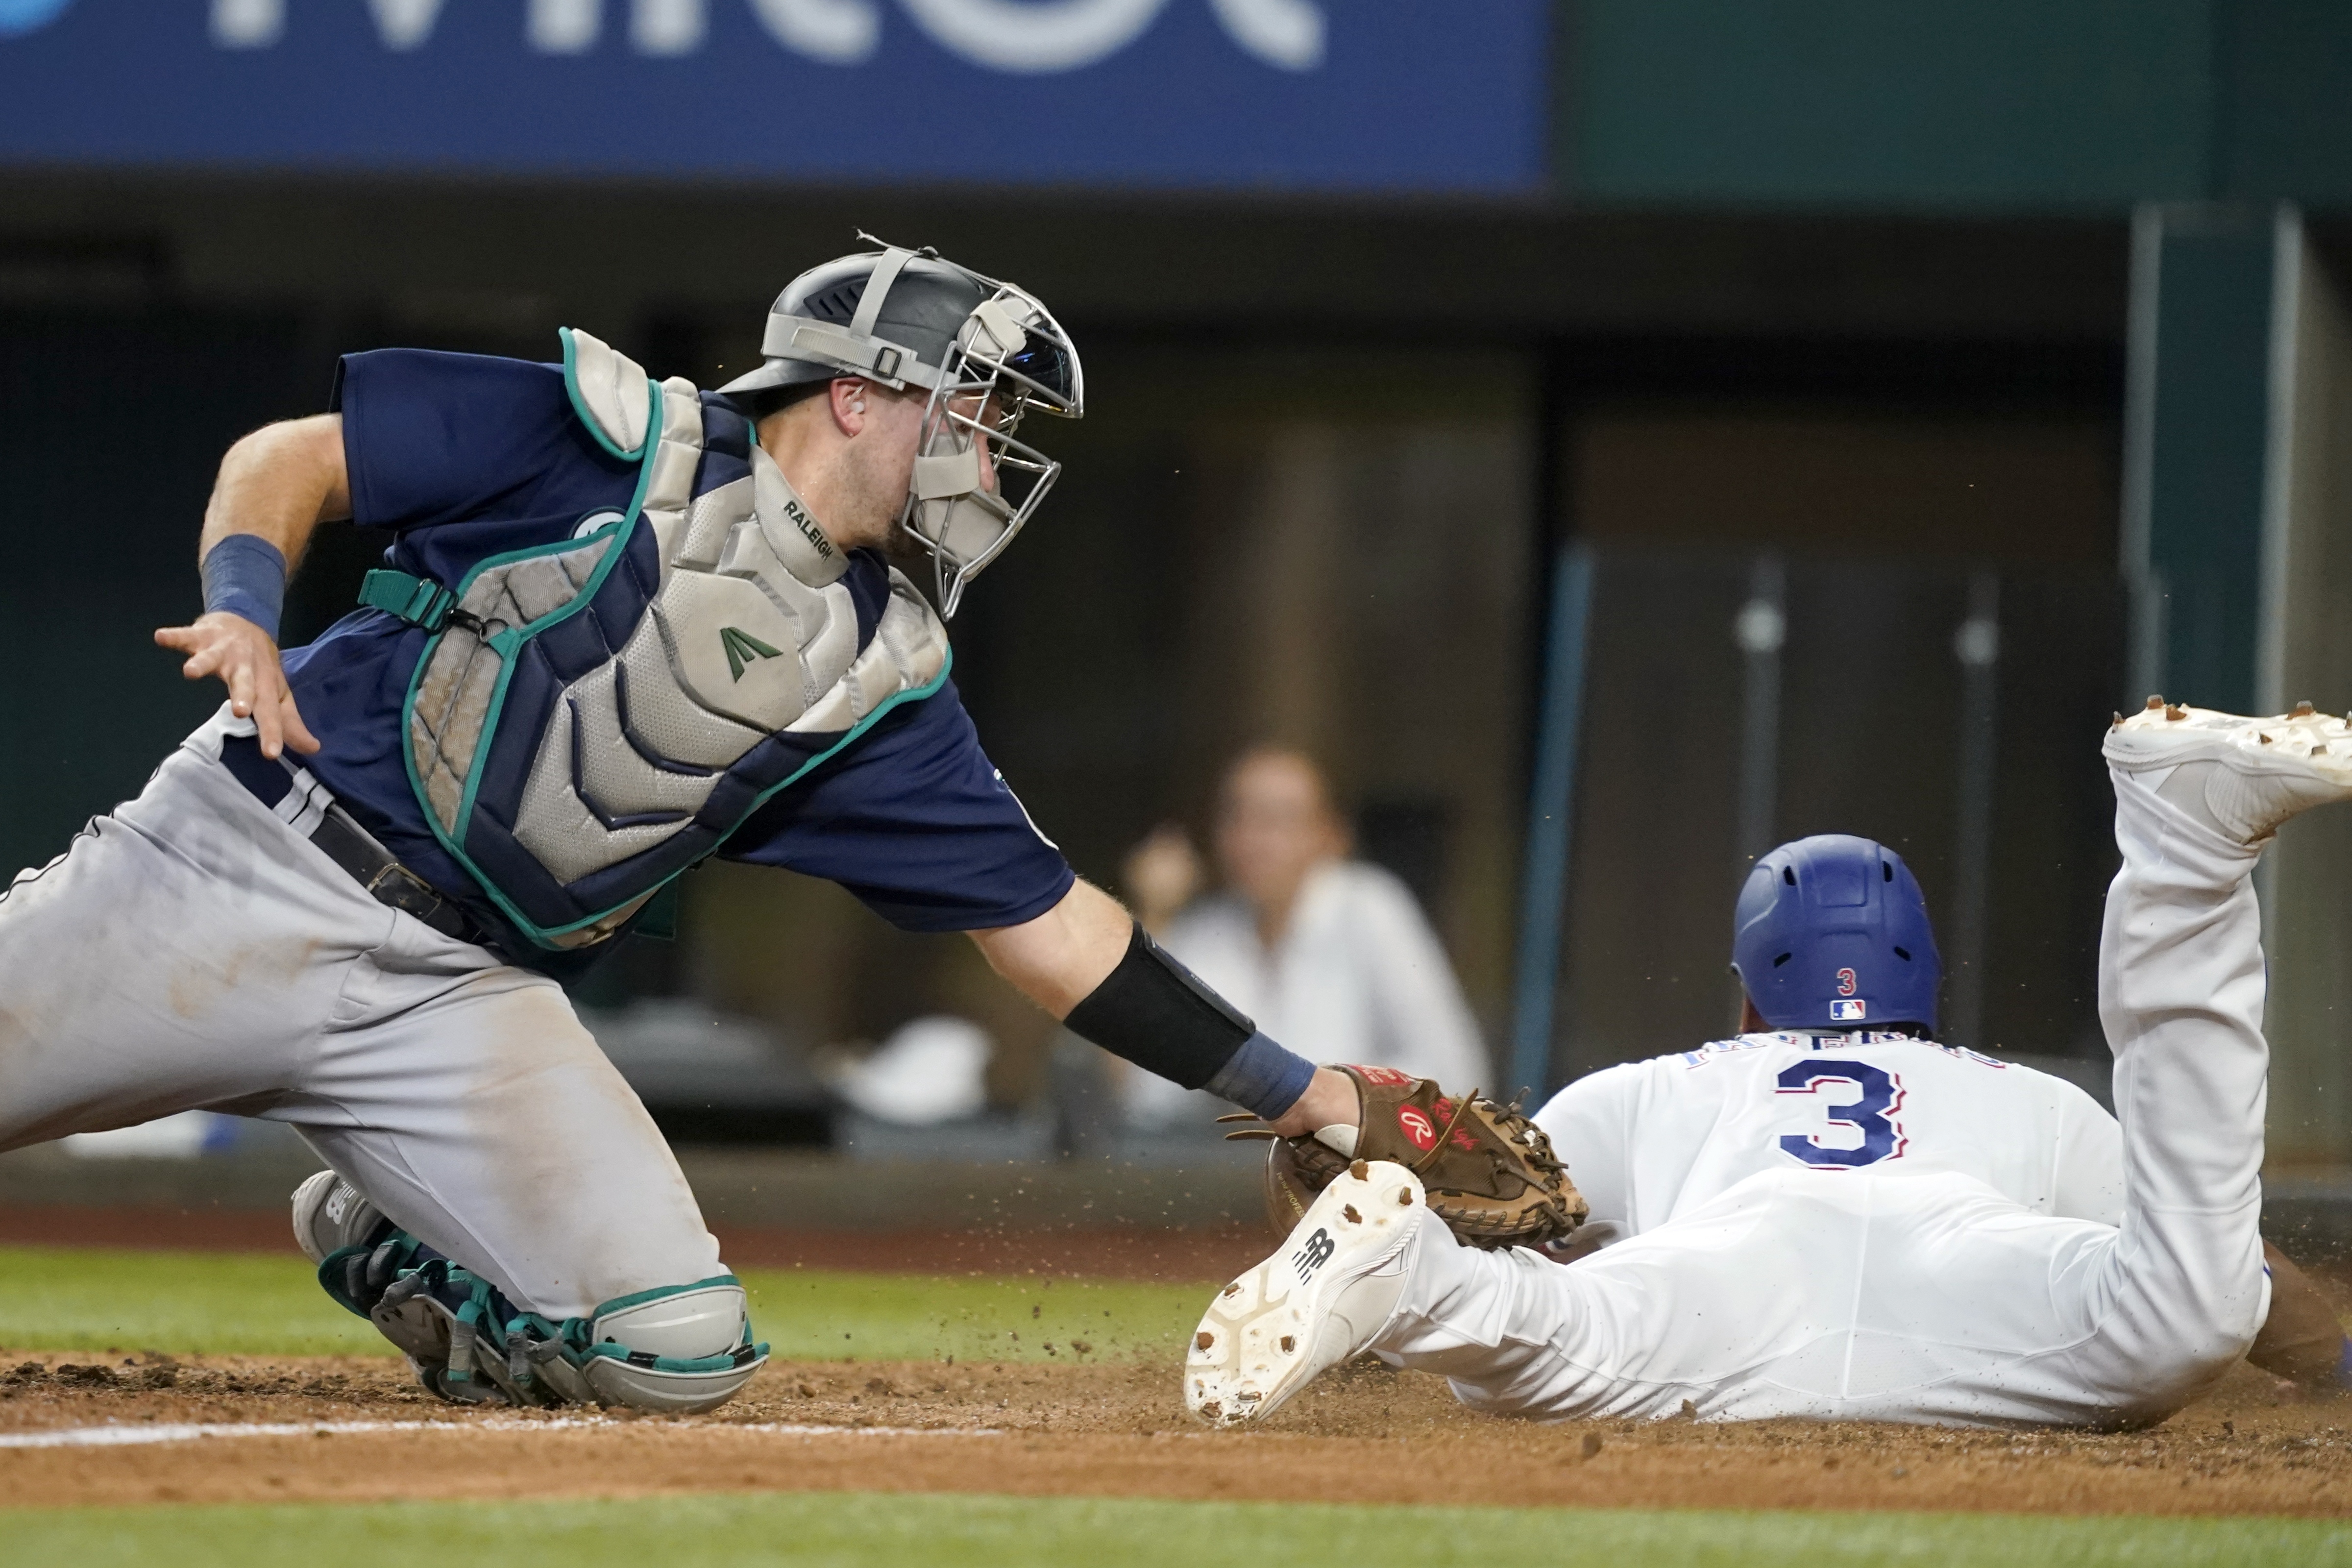 Castillo and Crawford lead the Mariners to a 4-0 victory over the